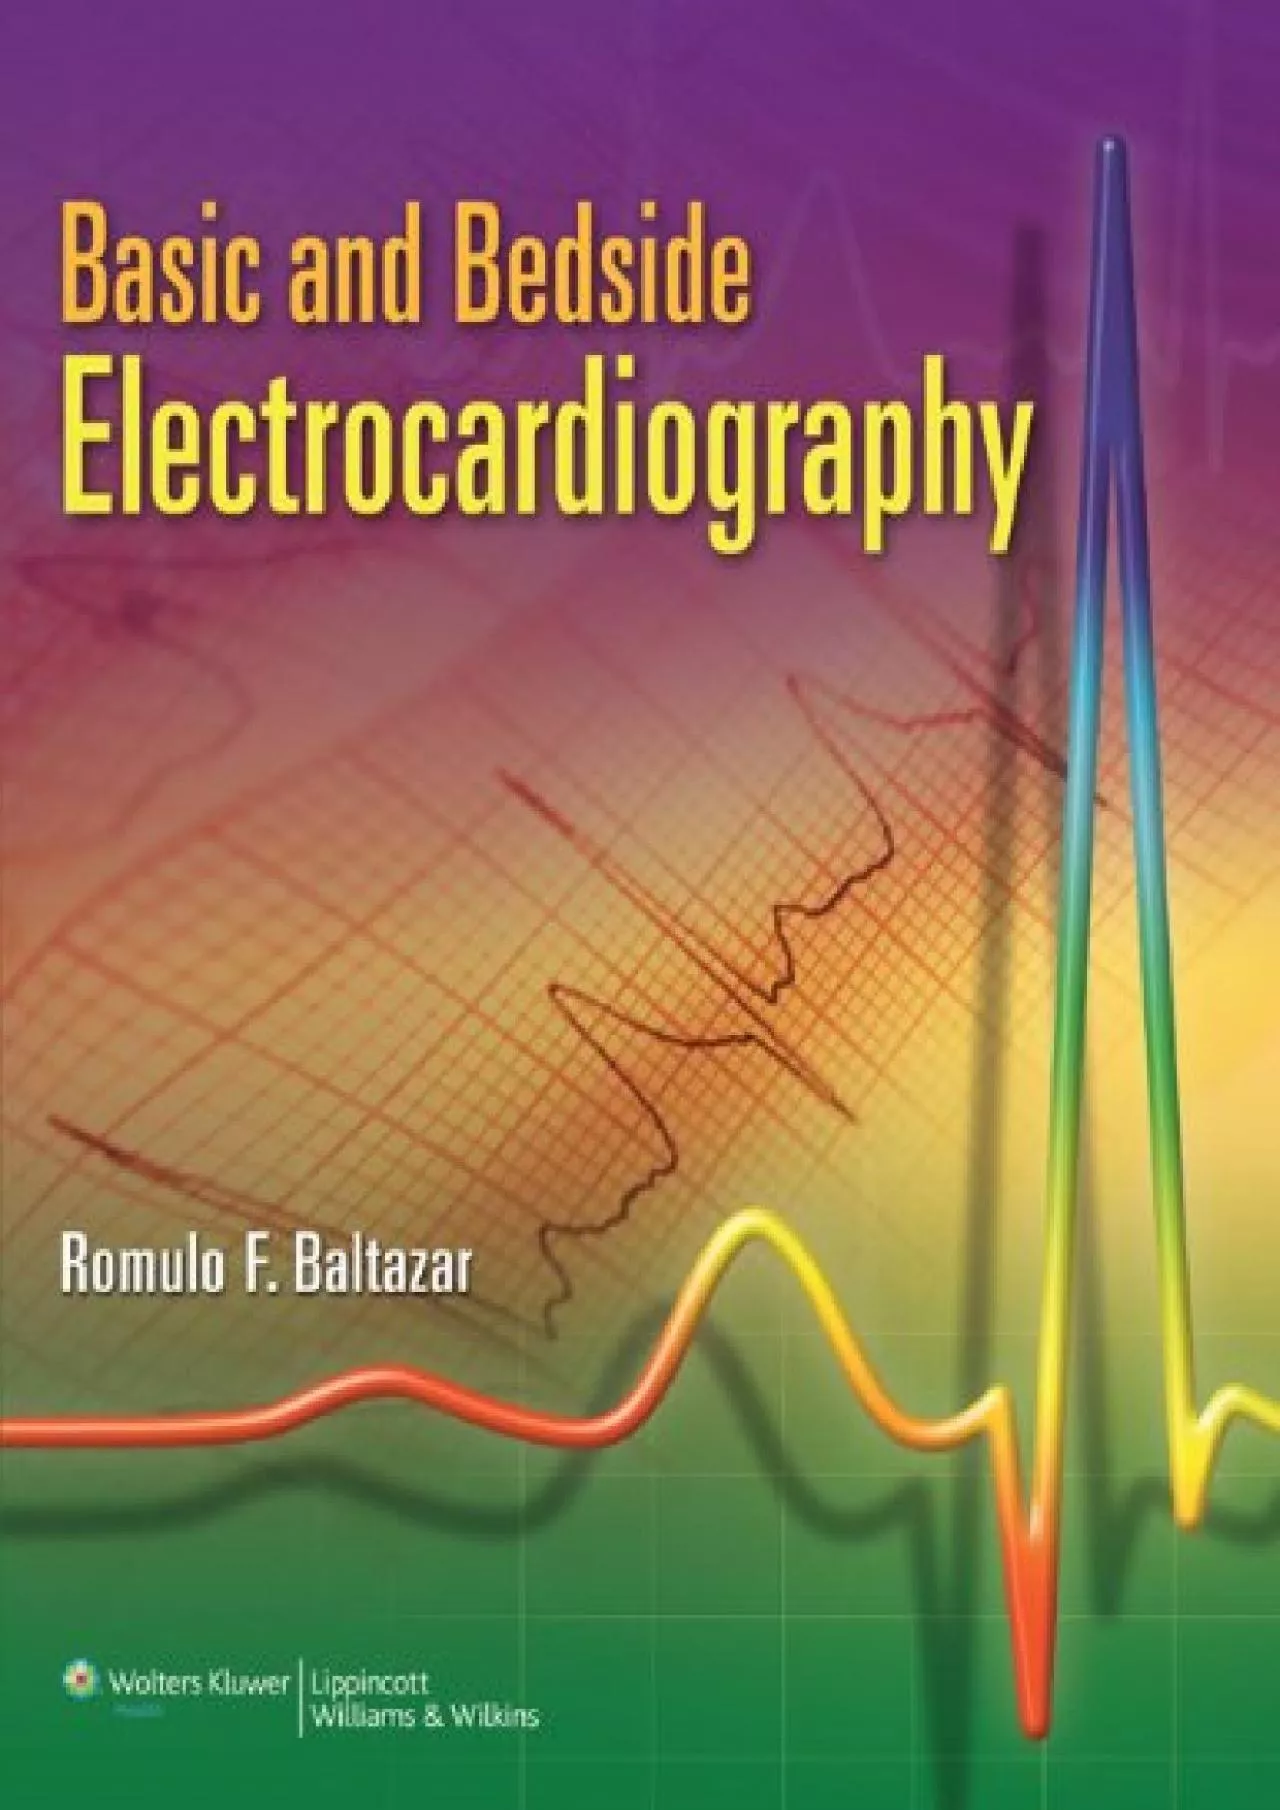 (BOOS)-Basic and Bedside Electrocardiography